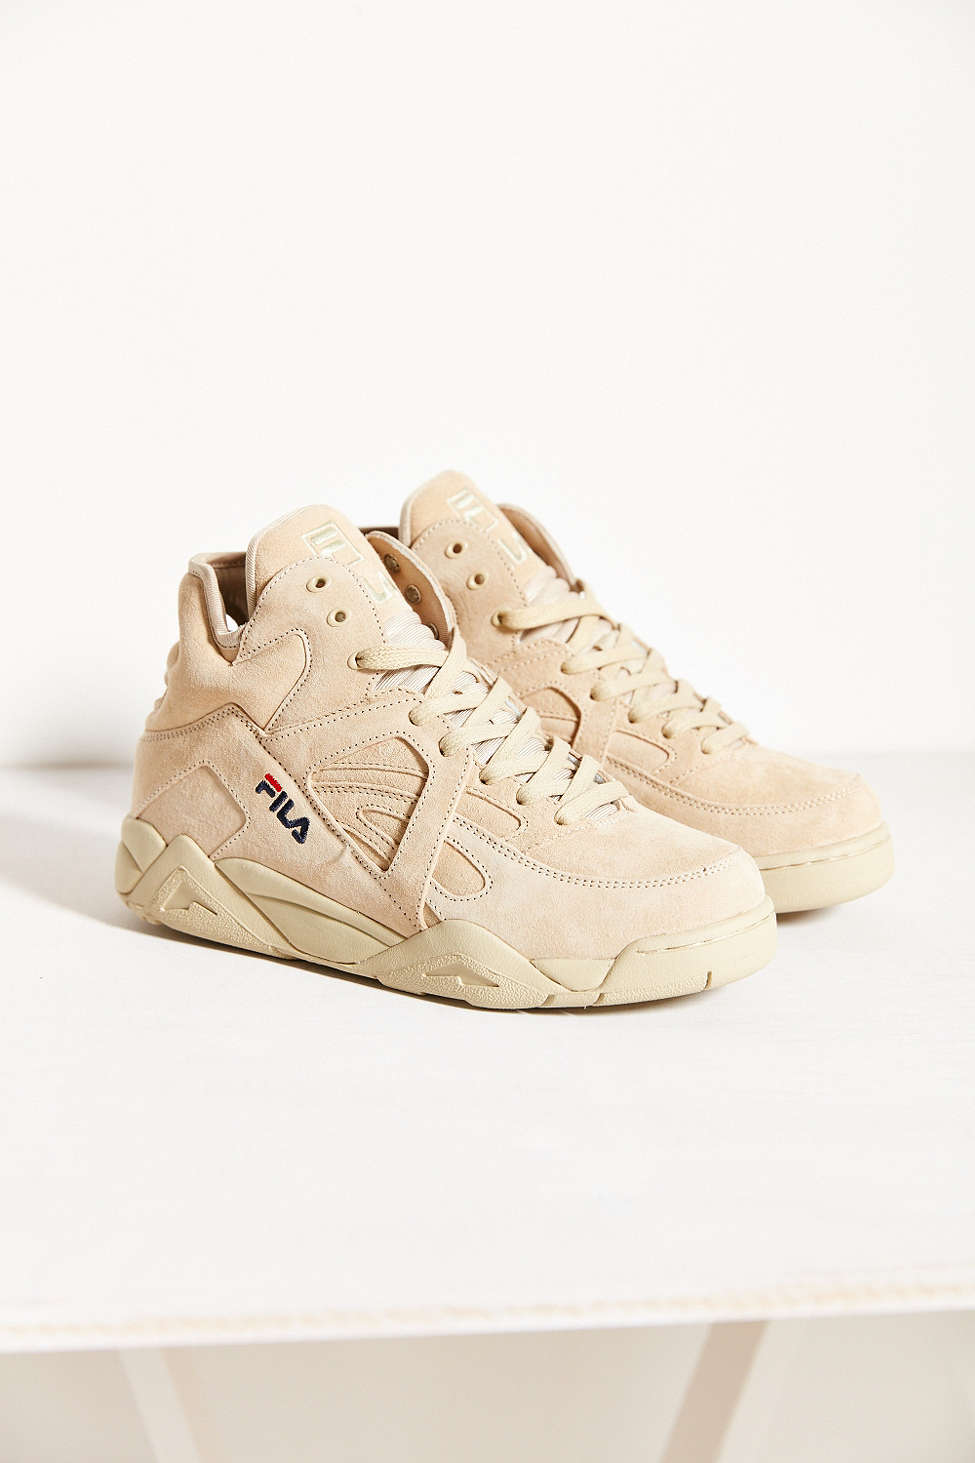 Urban Outfitters x FILA Cage 'Cream' Makes the Fellas Jealous - WearTesters